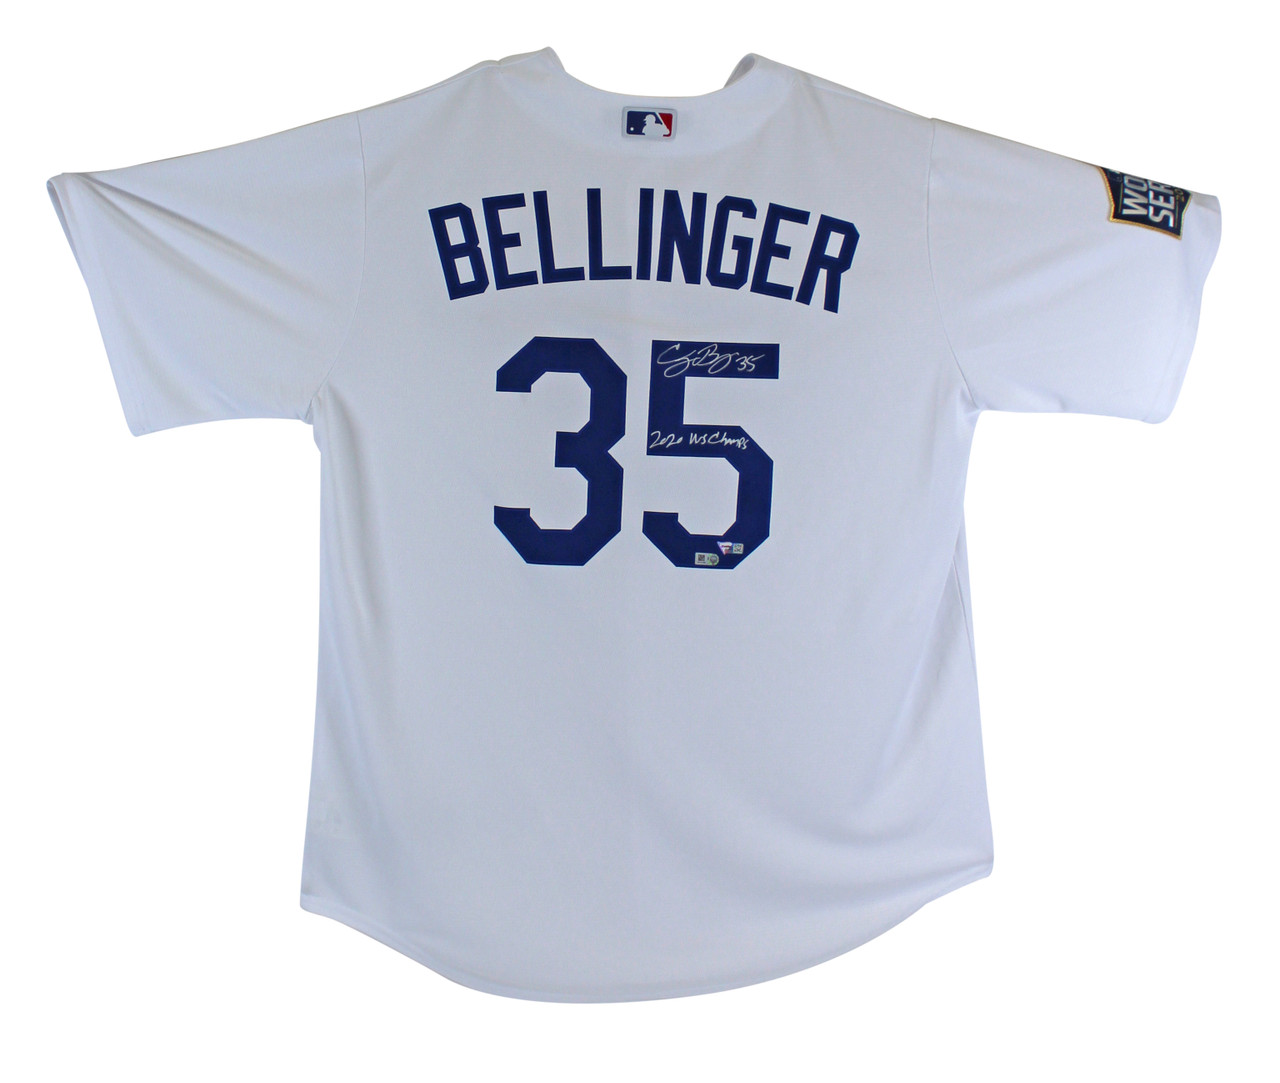 Fanatics Authentic Cody Bellinger Los Angeles Dodgers Autographed 2020 MLB World Series Champions Nike White Authentic Logo Jersey